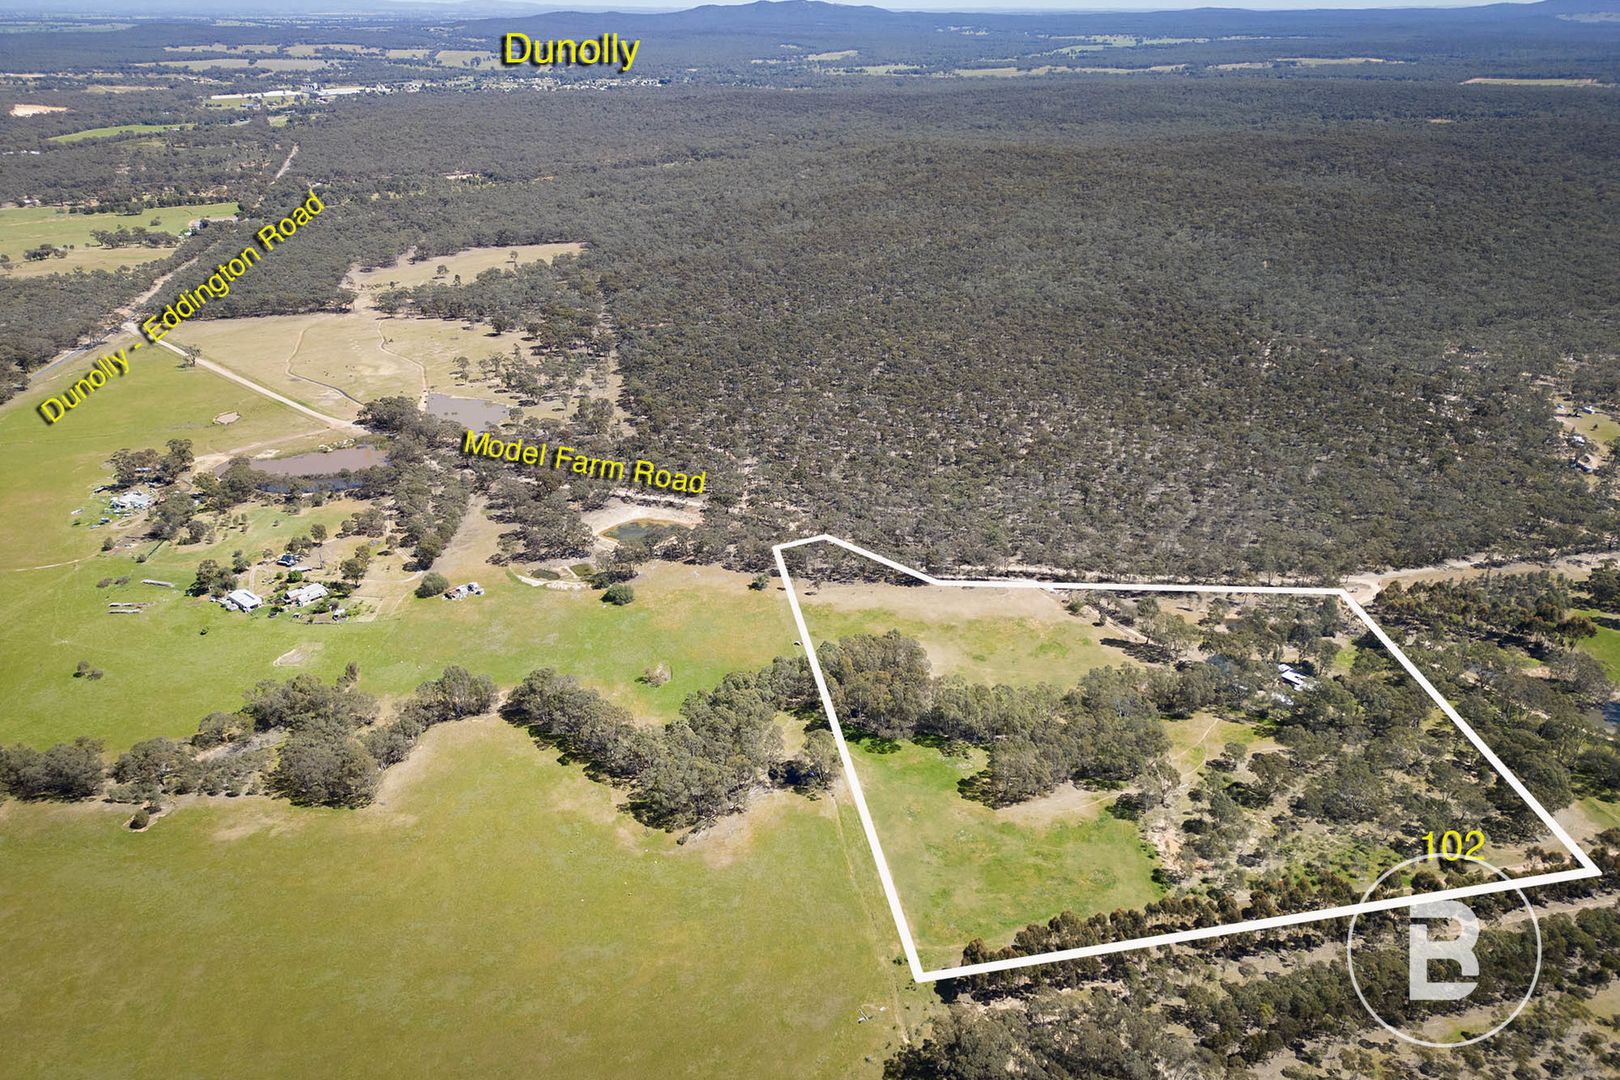 102 Model Farm Road, Dunolly VIC 3472, Image 1